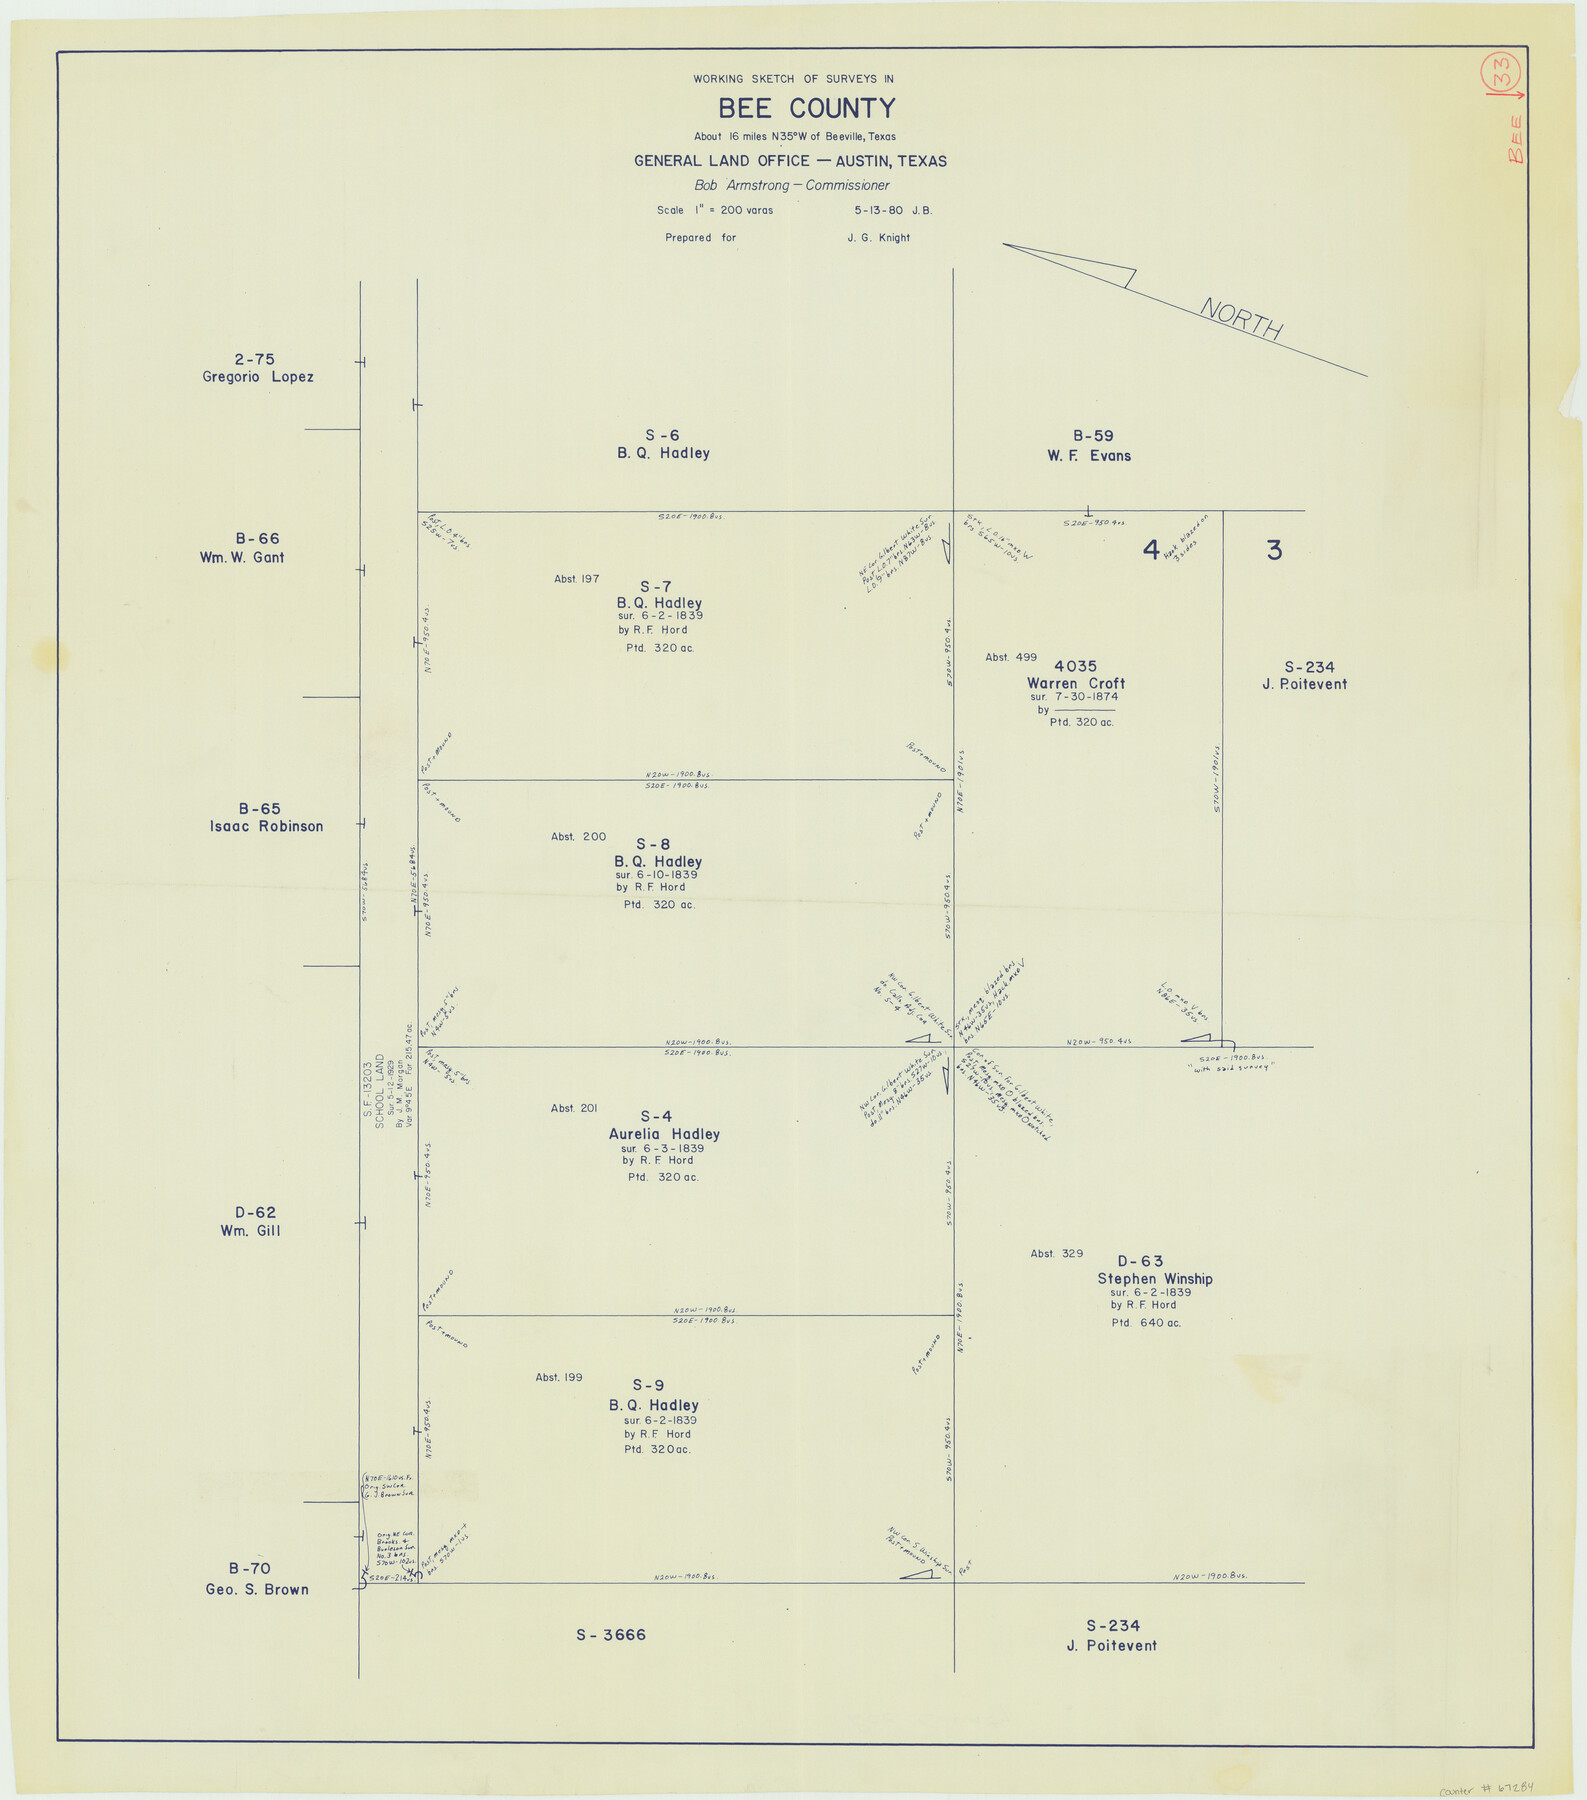 67284, Bee County Working Sketch 33, General Map Collection